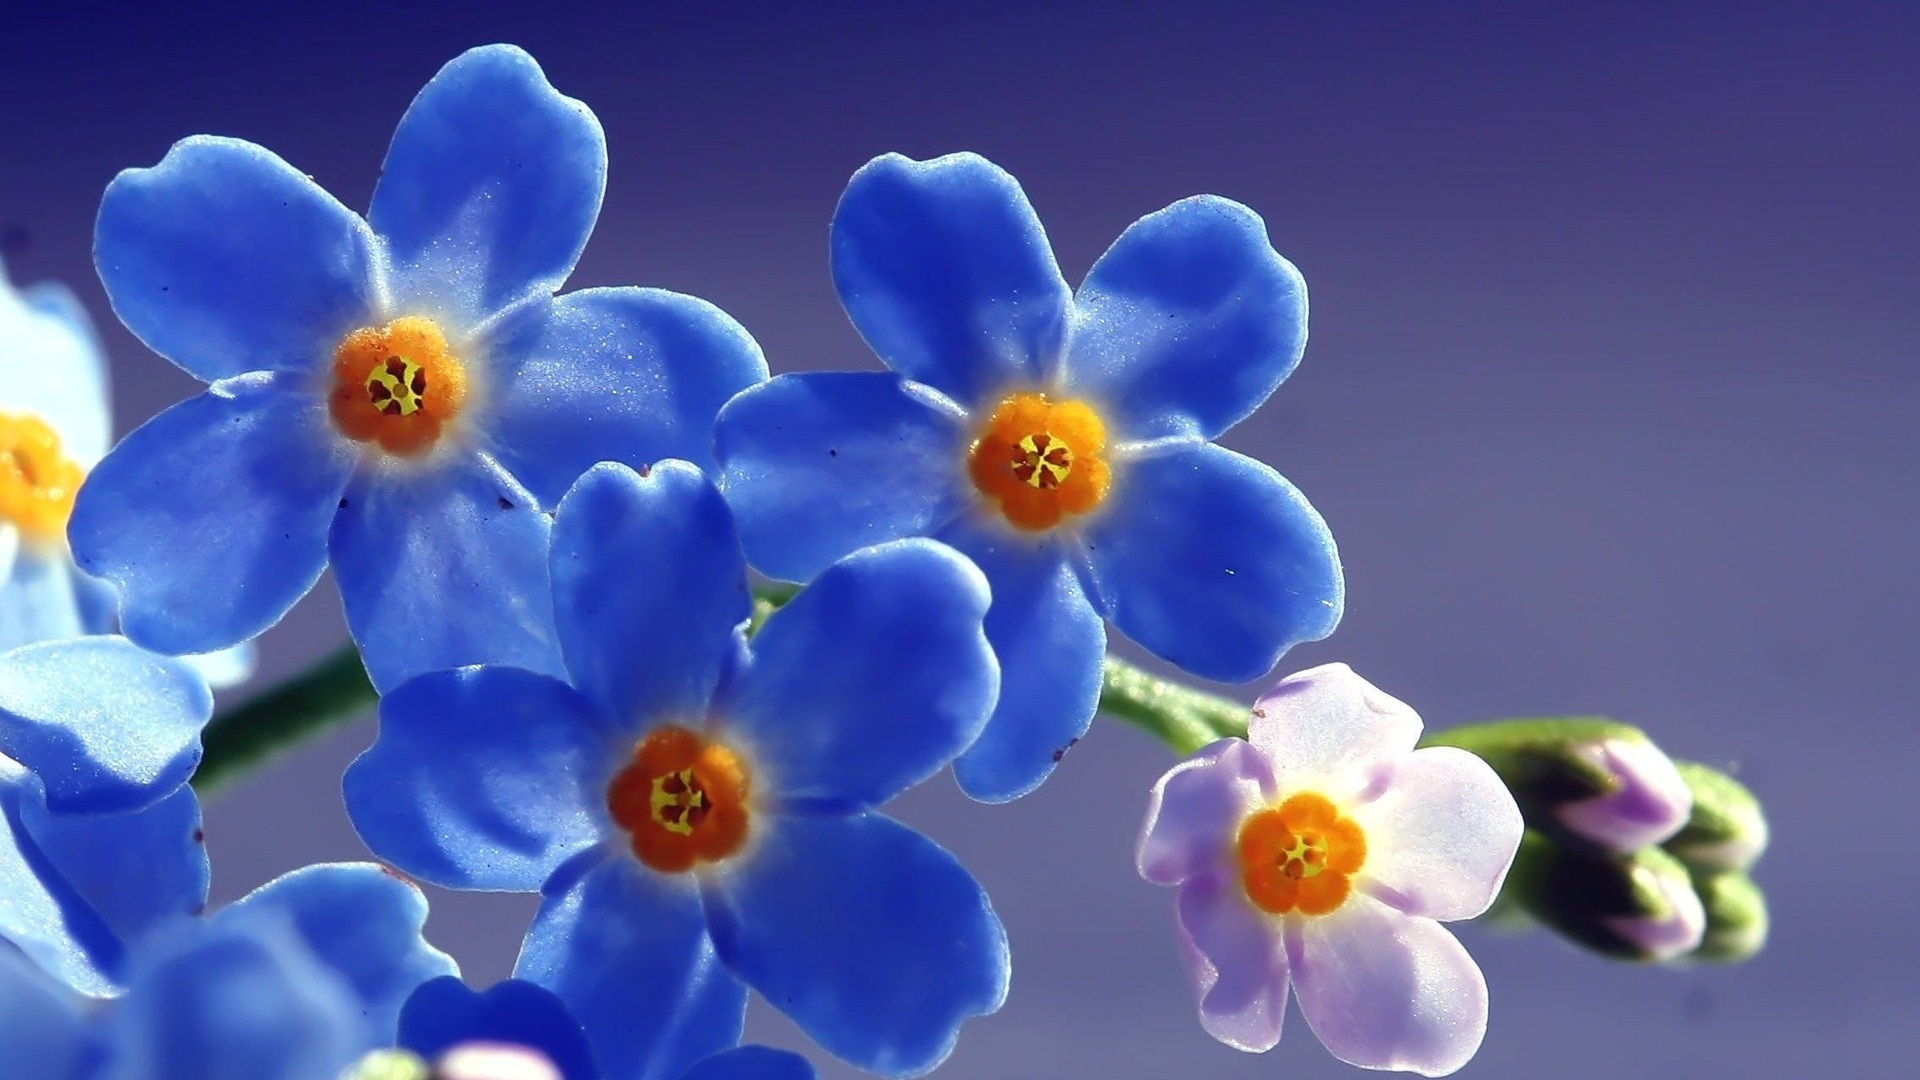 Blue Forget Me Not Flower for 1920 x 1080 HDTV 1080p resolution